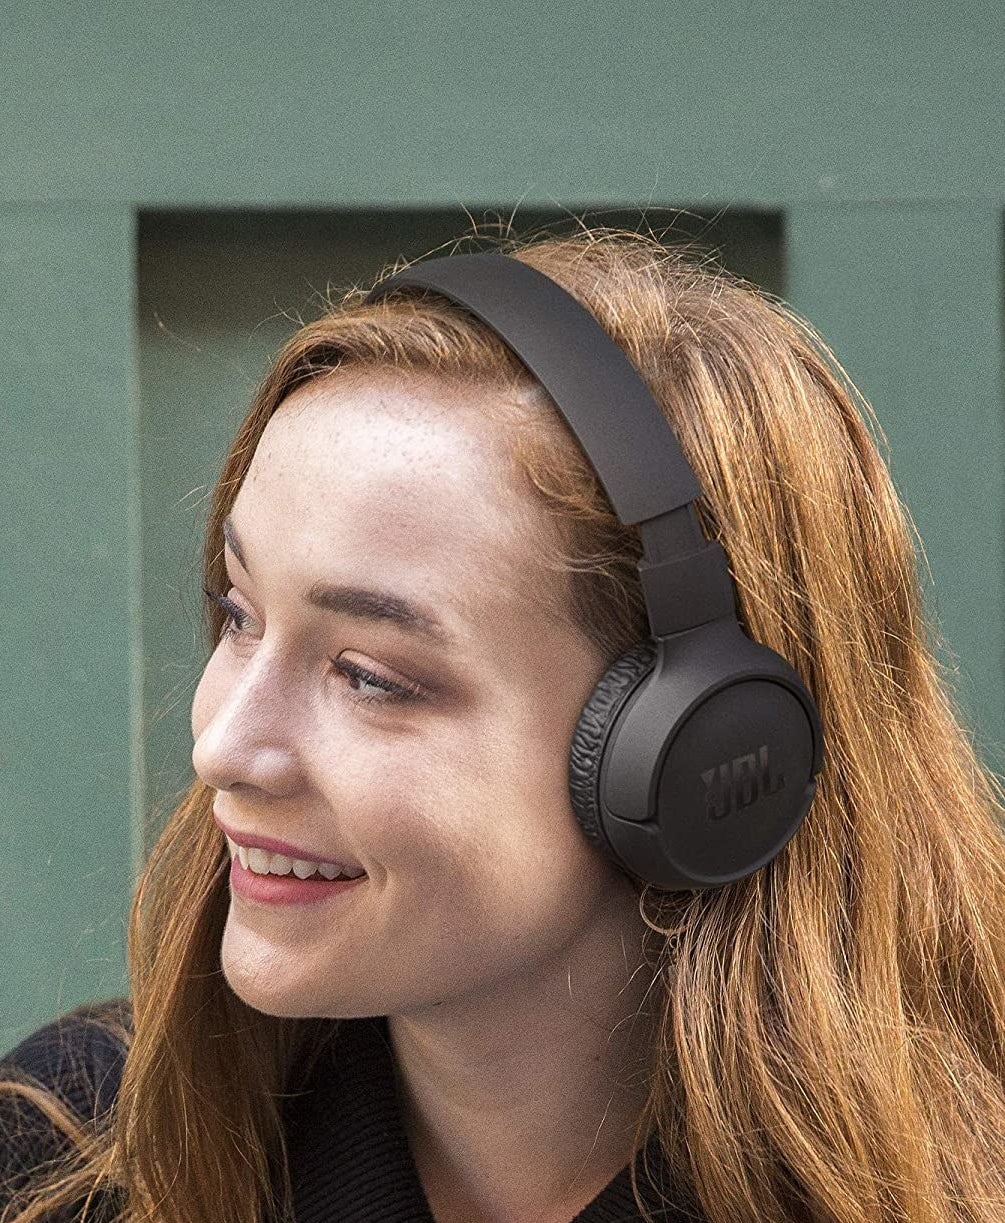 A person wearing over-ear headphones